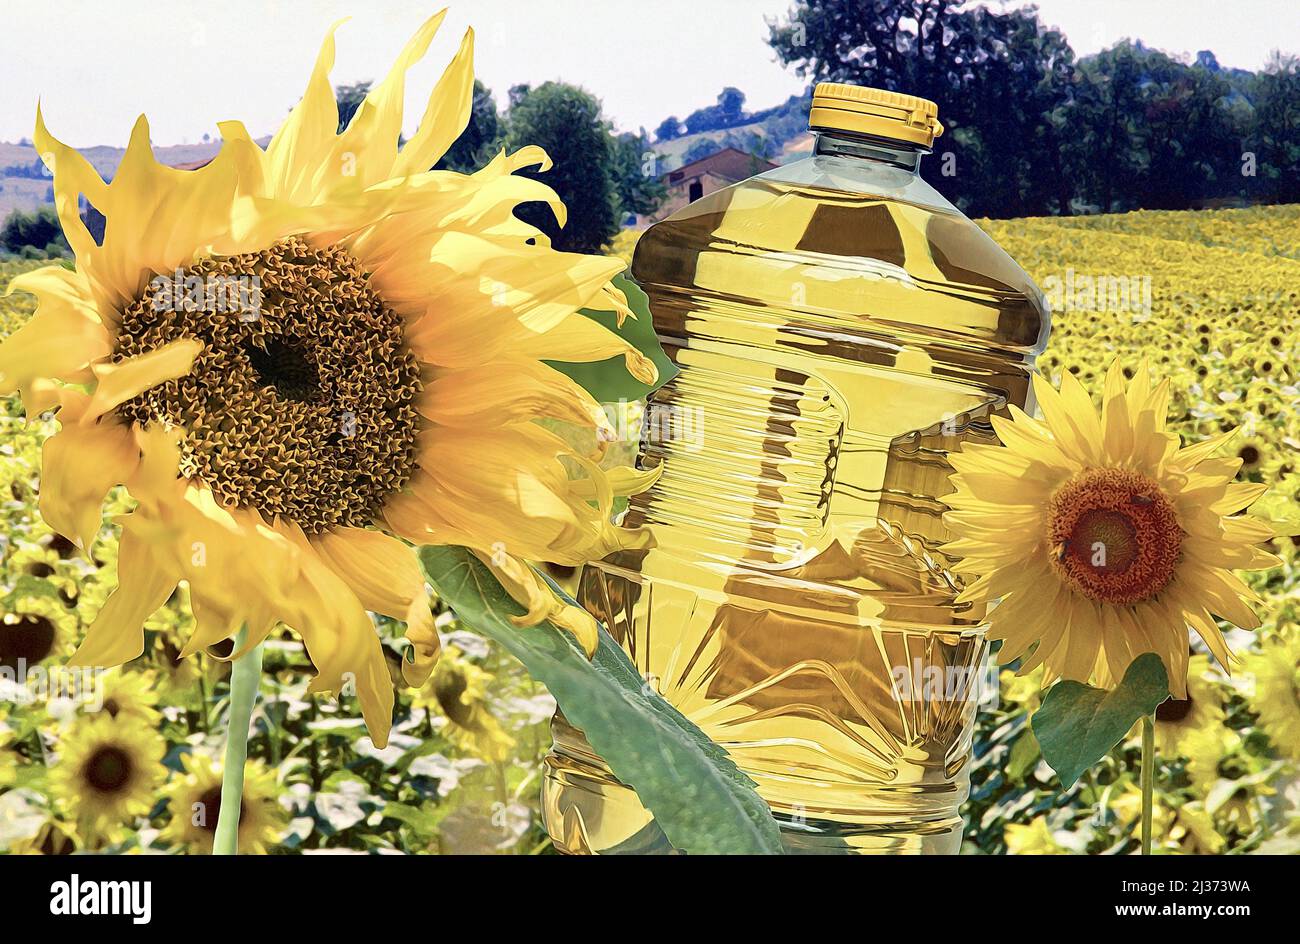 Representative, unlabeled bottle of sunflower oil set in a montage with sunflowers and fields. In the news as supplies are becoming scarce. Rusia and Stock Photo